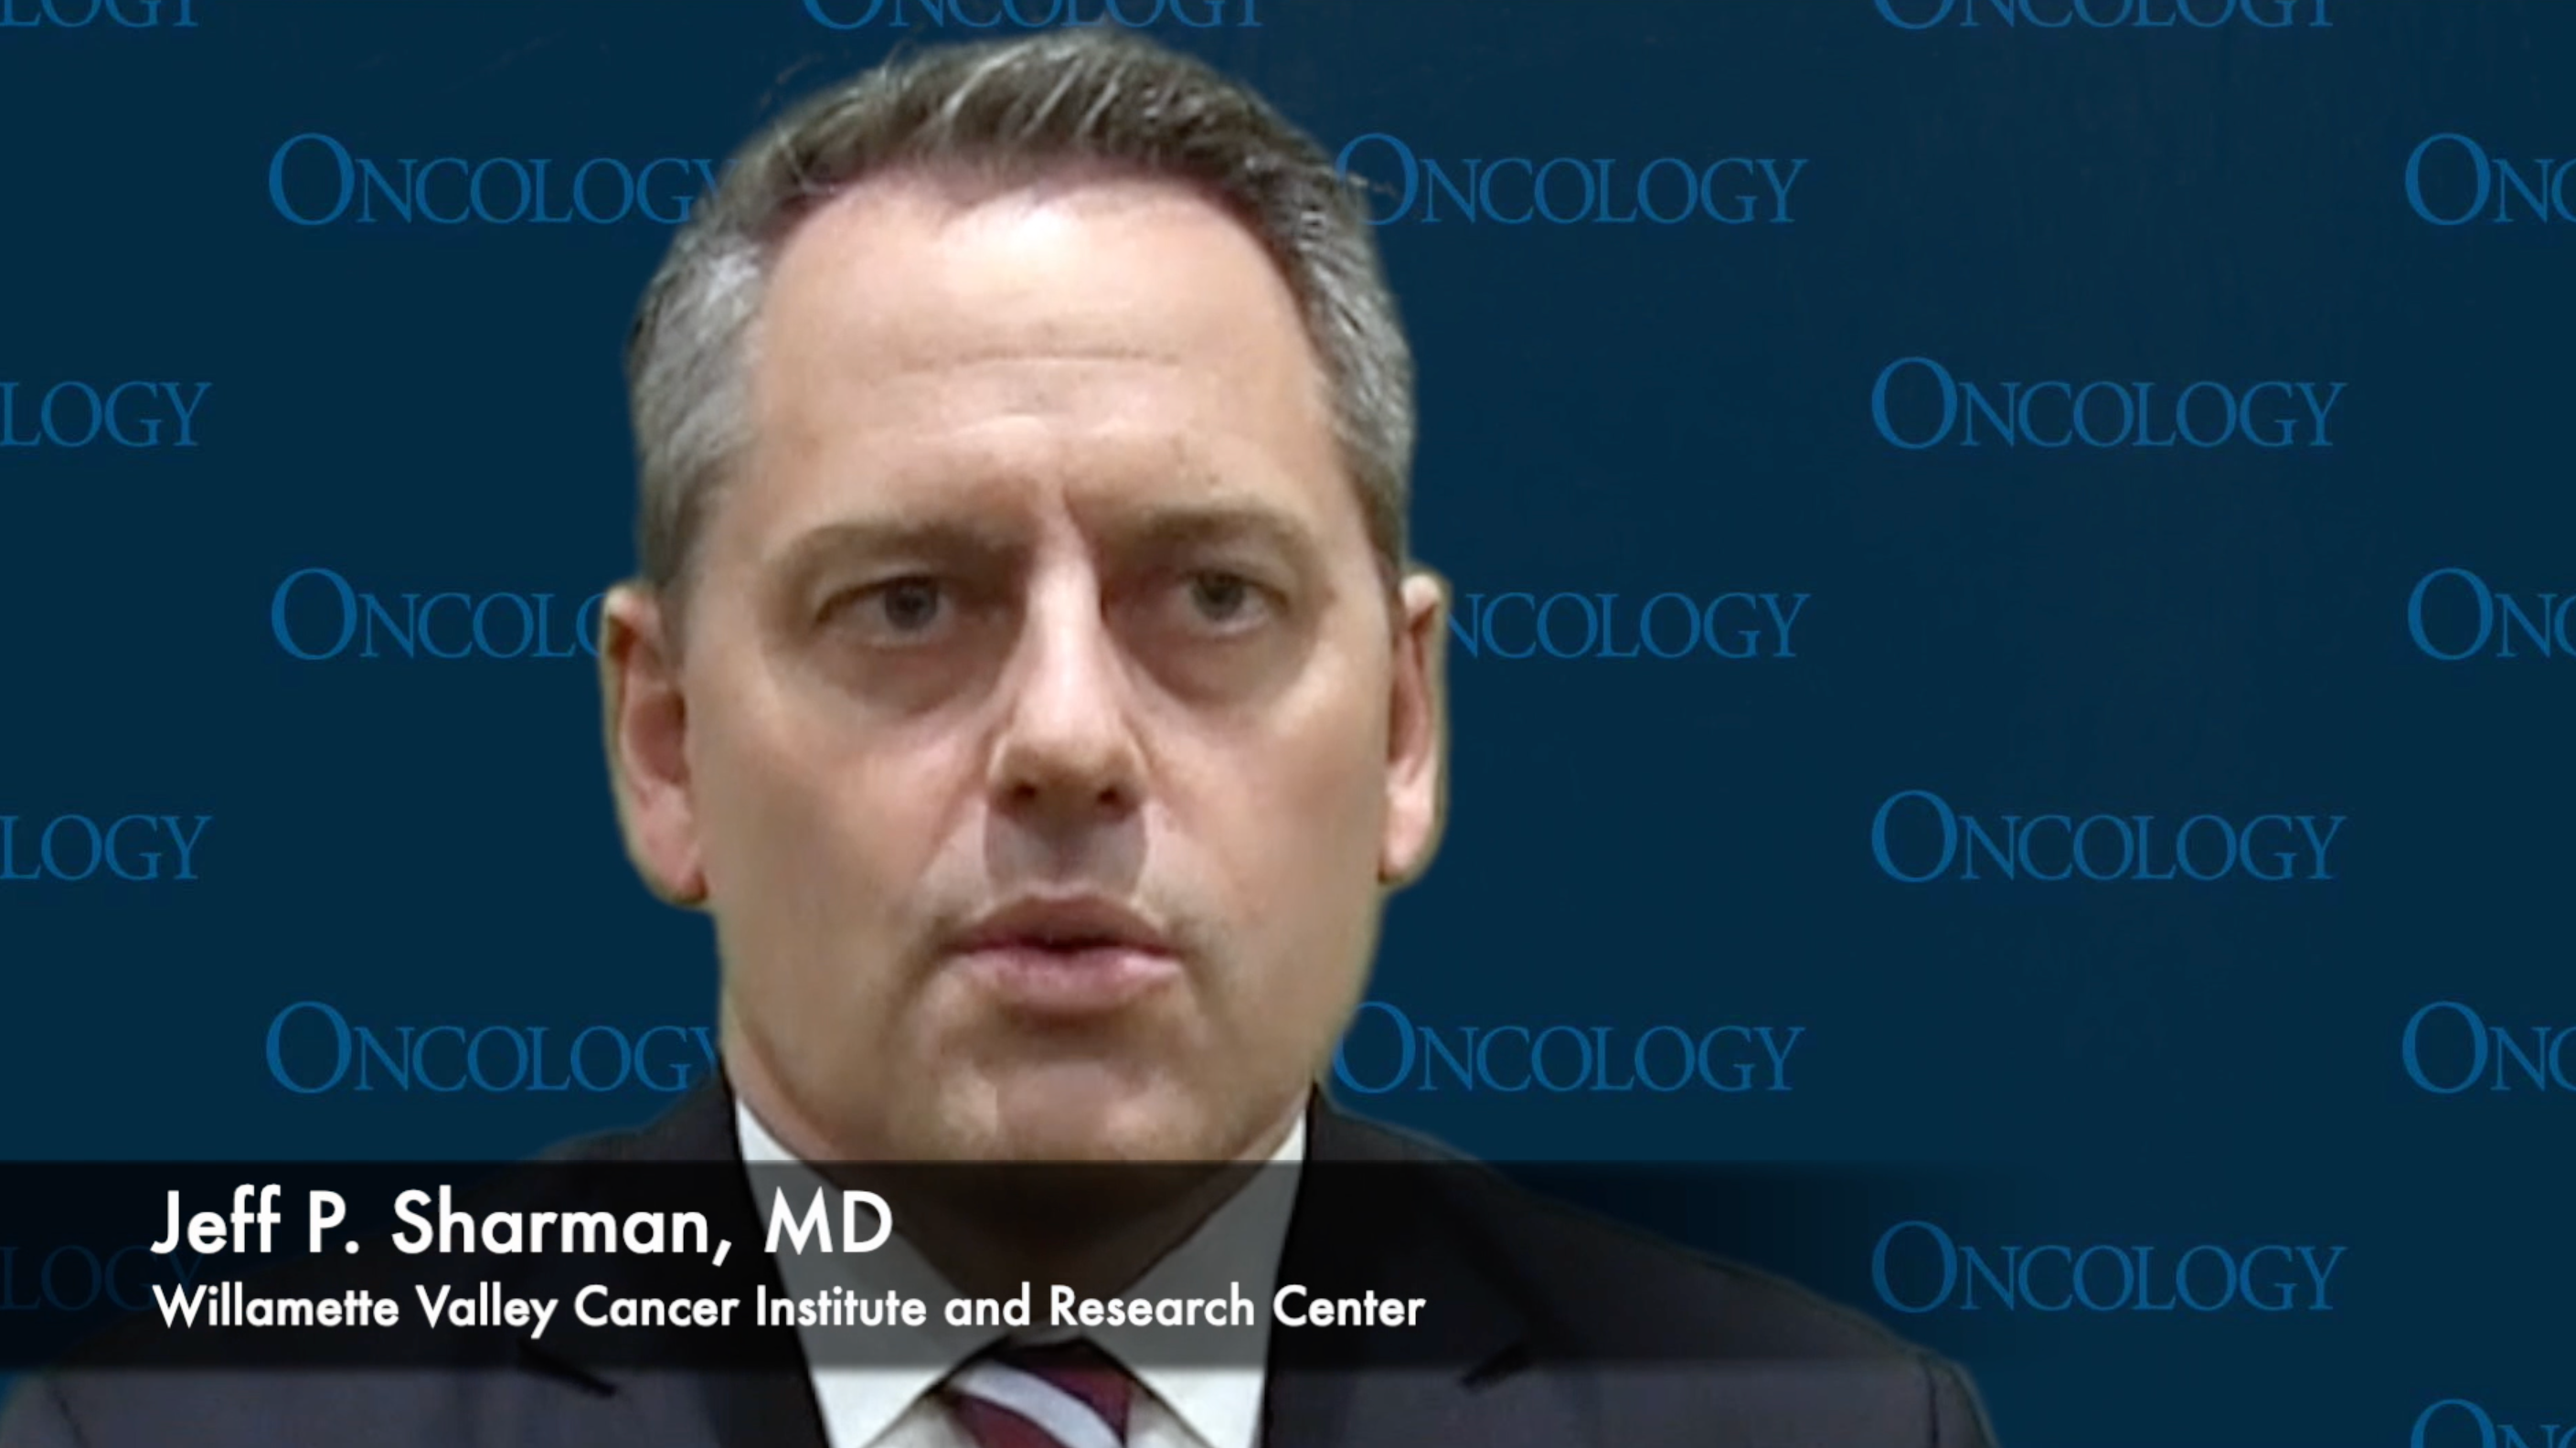 Jeff P. Sharman, MD, on Results from the ELEVATE TN Study in CLL